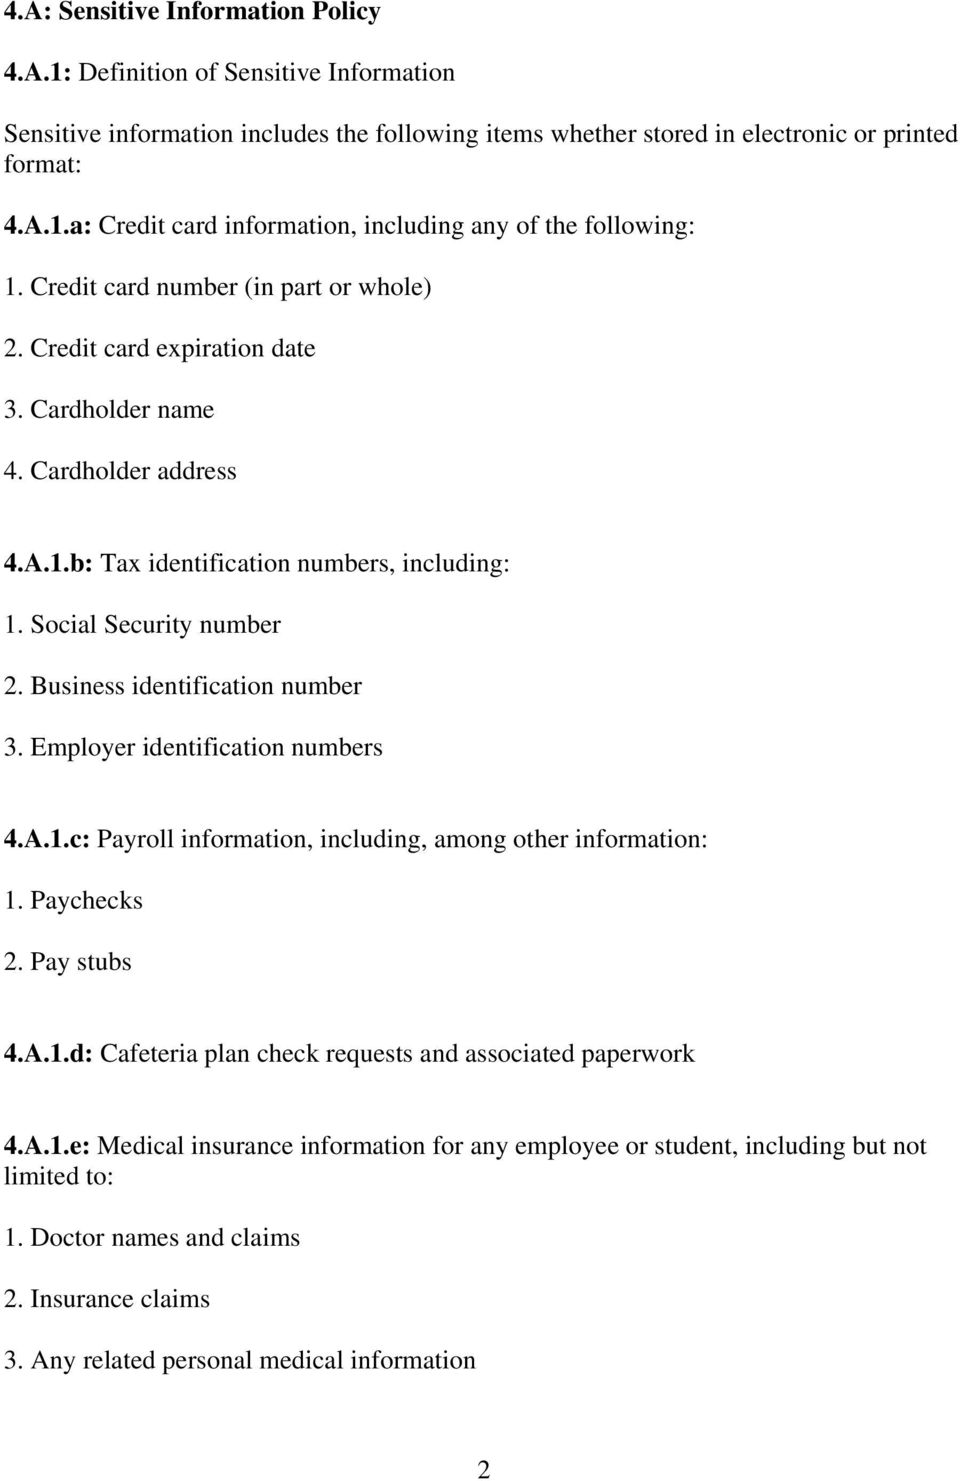 Business identification number 3. Employer identification numbers 4.A.1.c: Payroll information, including, among other information: 1. Paychecks 2. Pay stubs 4.A.1.d: Cafeteria plan check requests and associated paperwork 4.